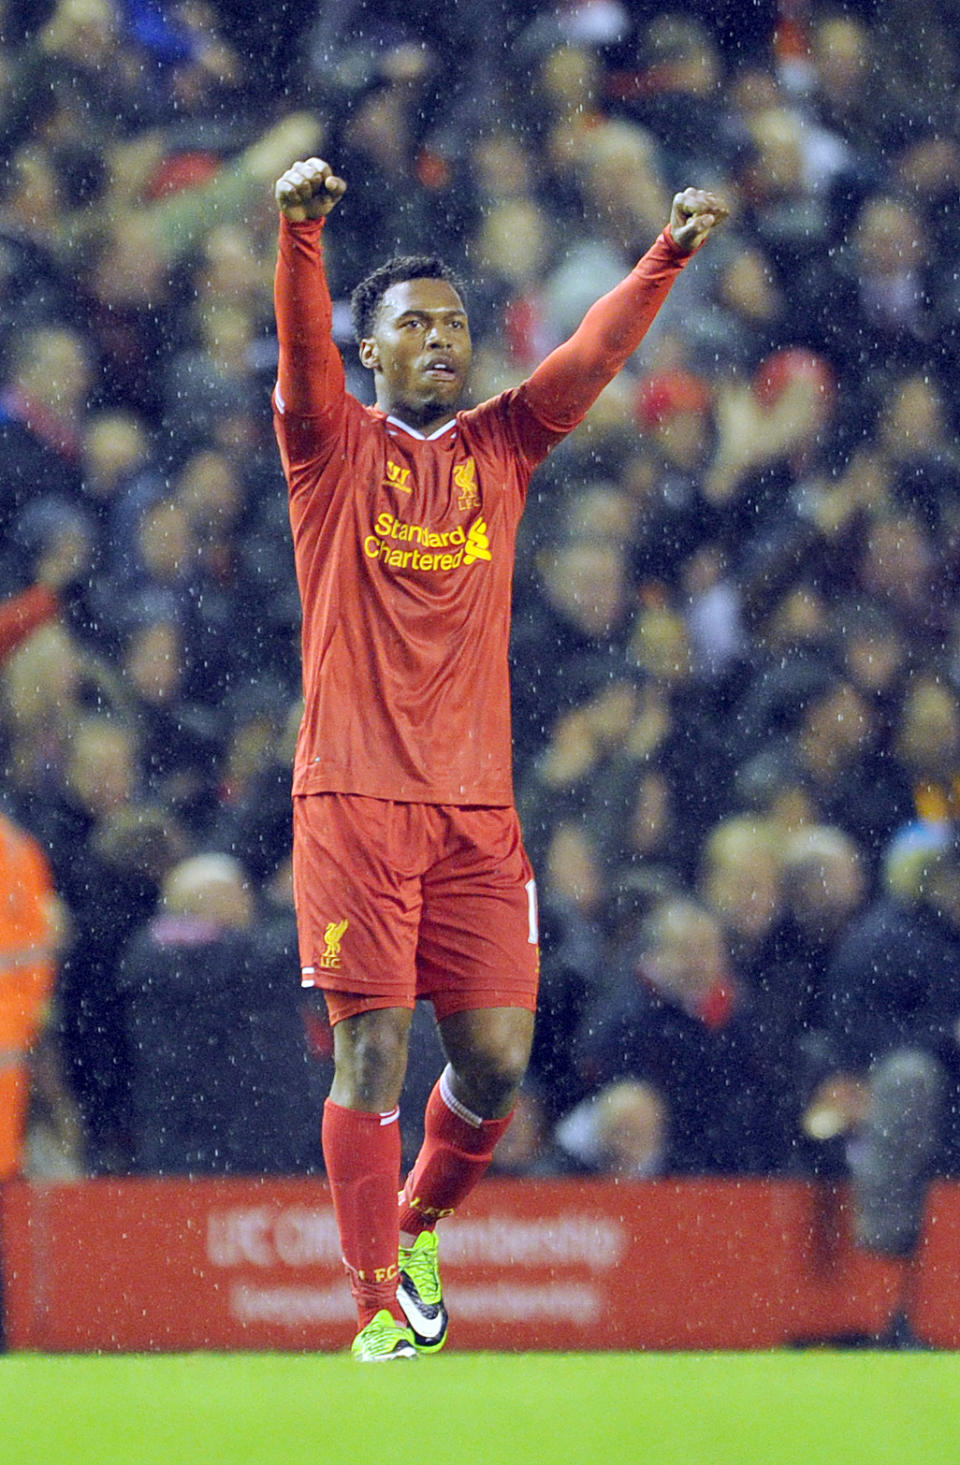 Liverpool's Daniel Sturridge celebrates after he scords the second goal of the game for his side during their English Premier League soccer match against Everton at Anfield in Liverpool, England, Tuesday Jan. 28, 2014. (AP Photo/Clint Hughes)